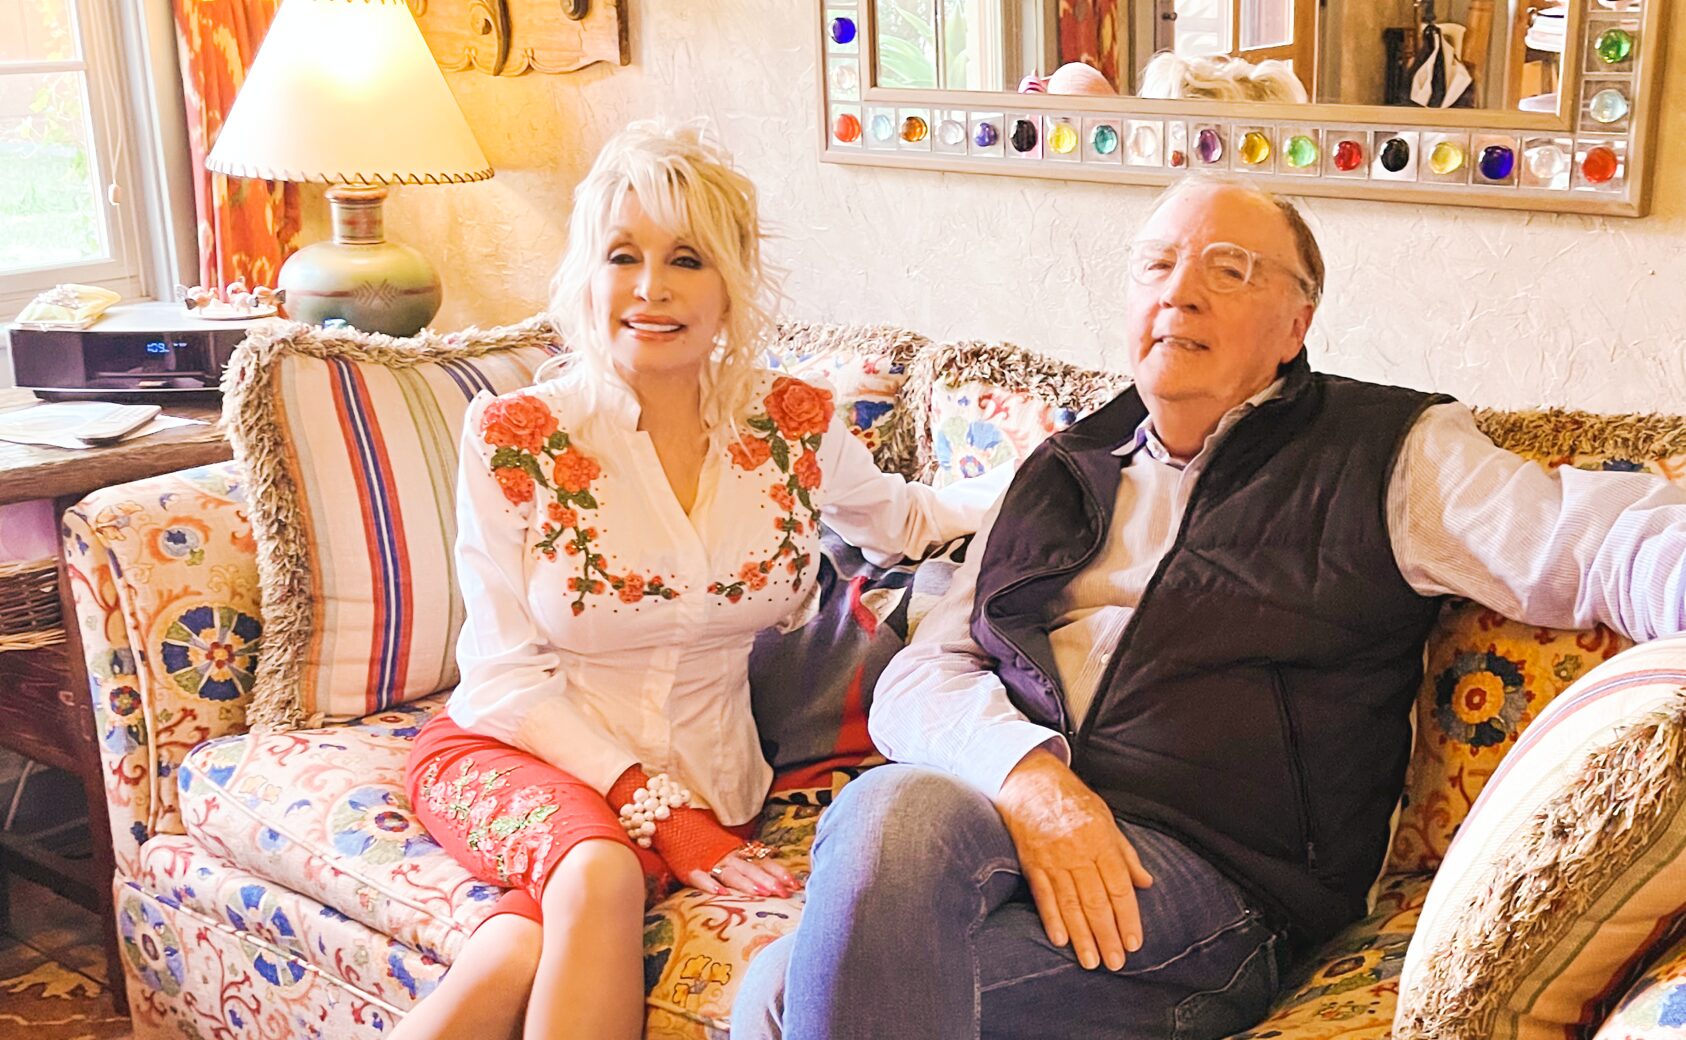 Dolly Parton and James Patterson sitting on a couch together.